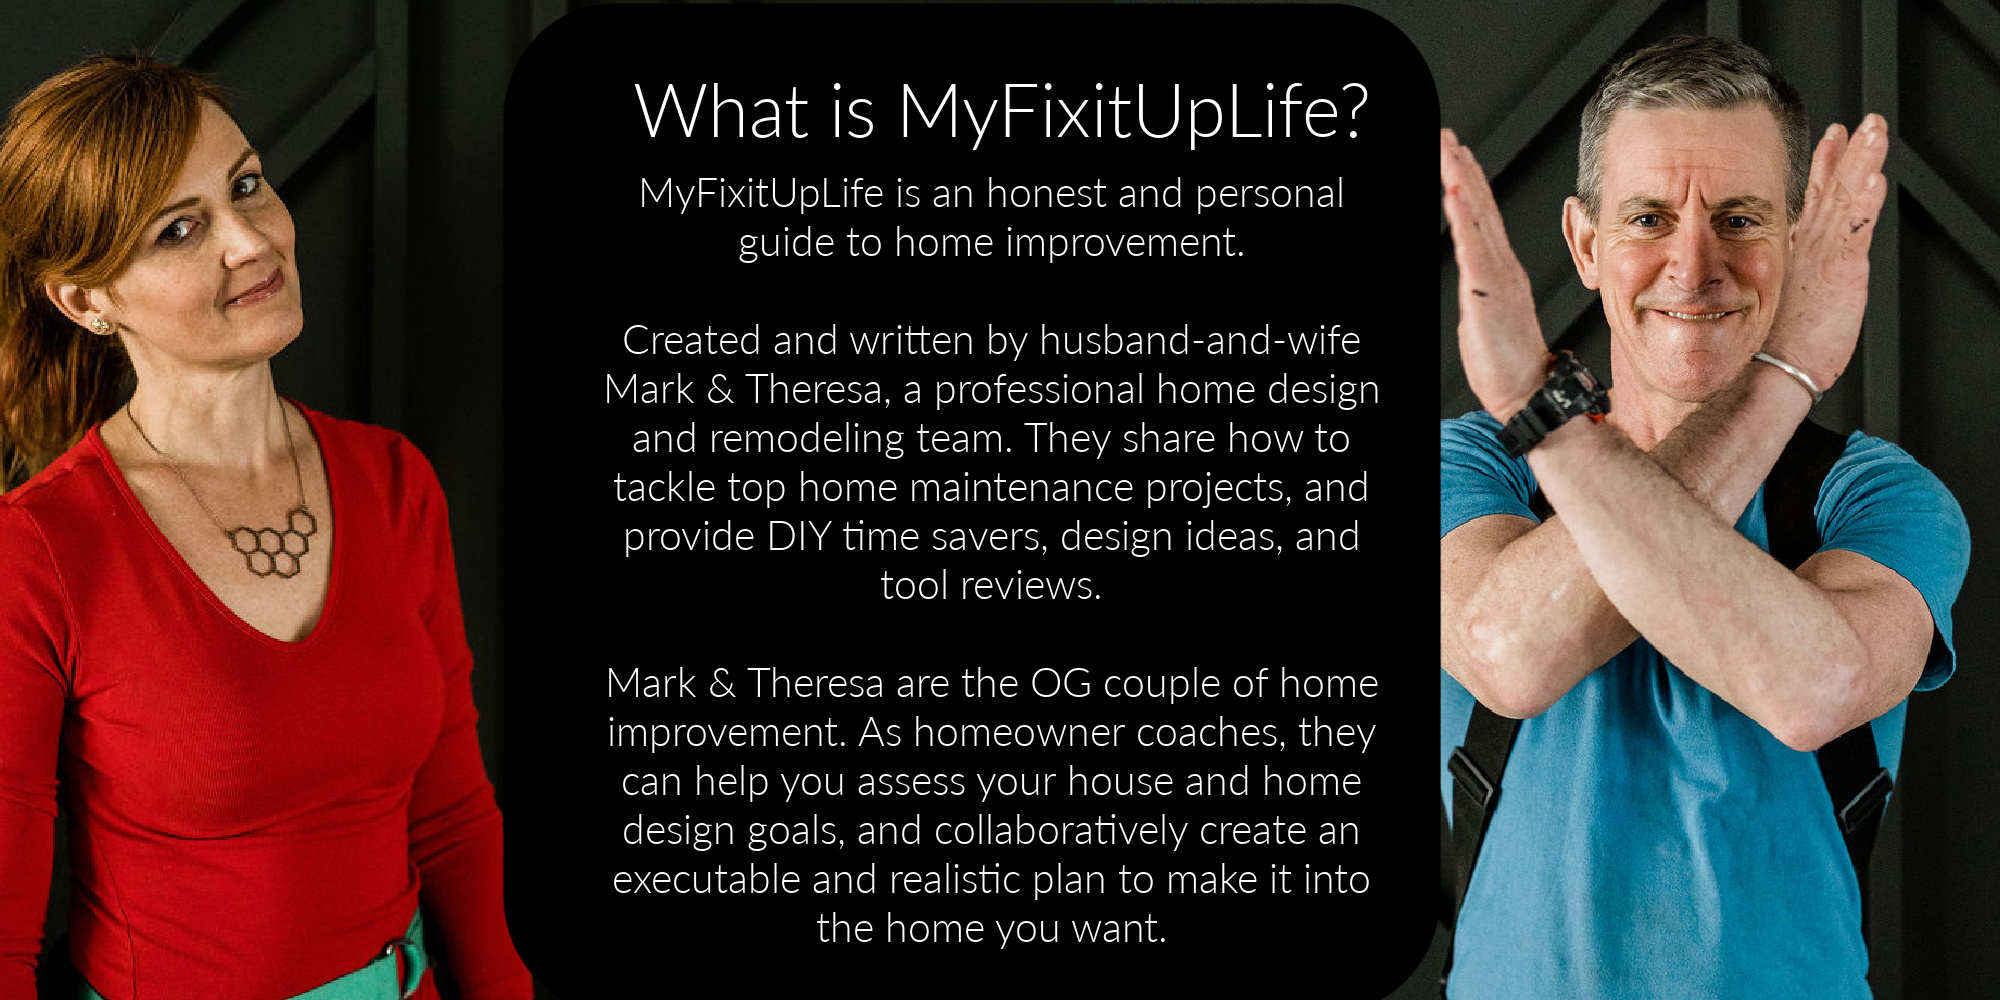 What is MyFixitUpLife?